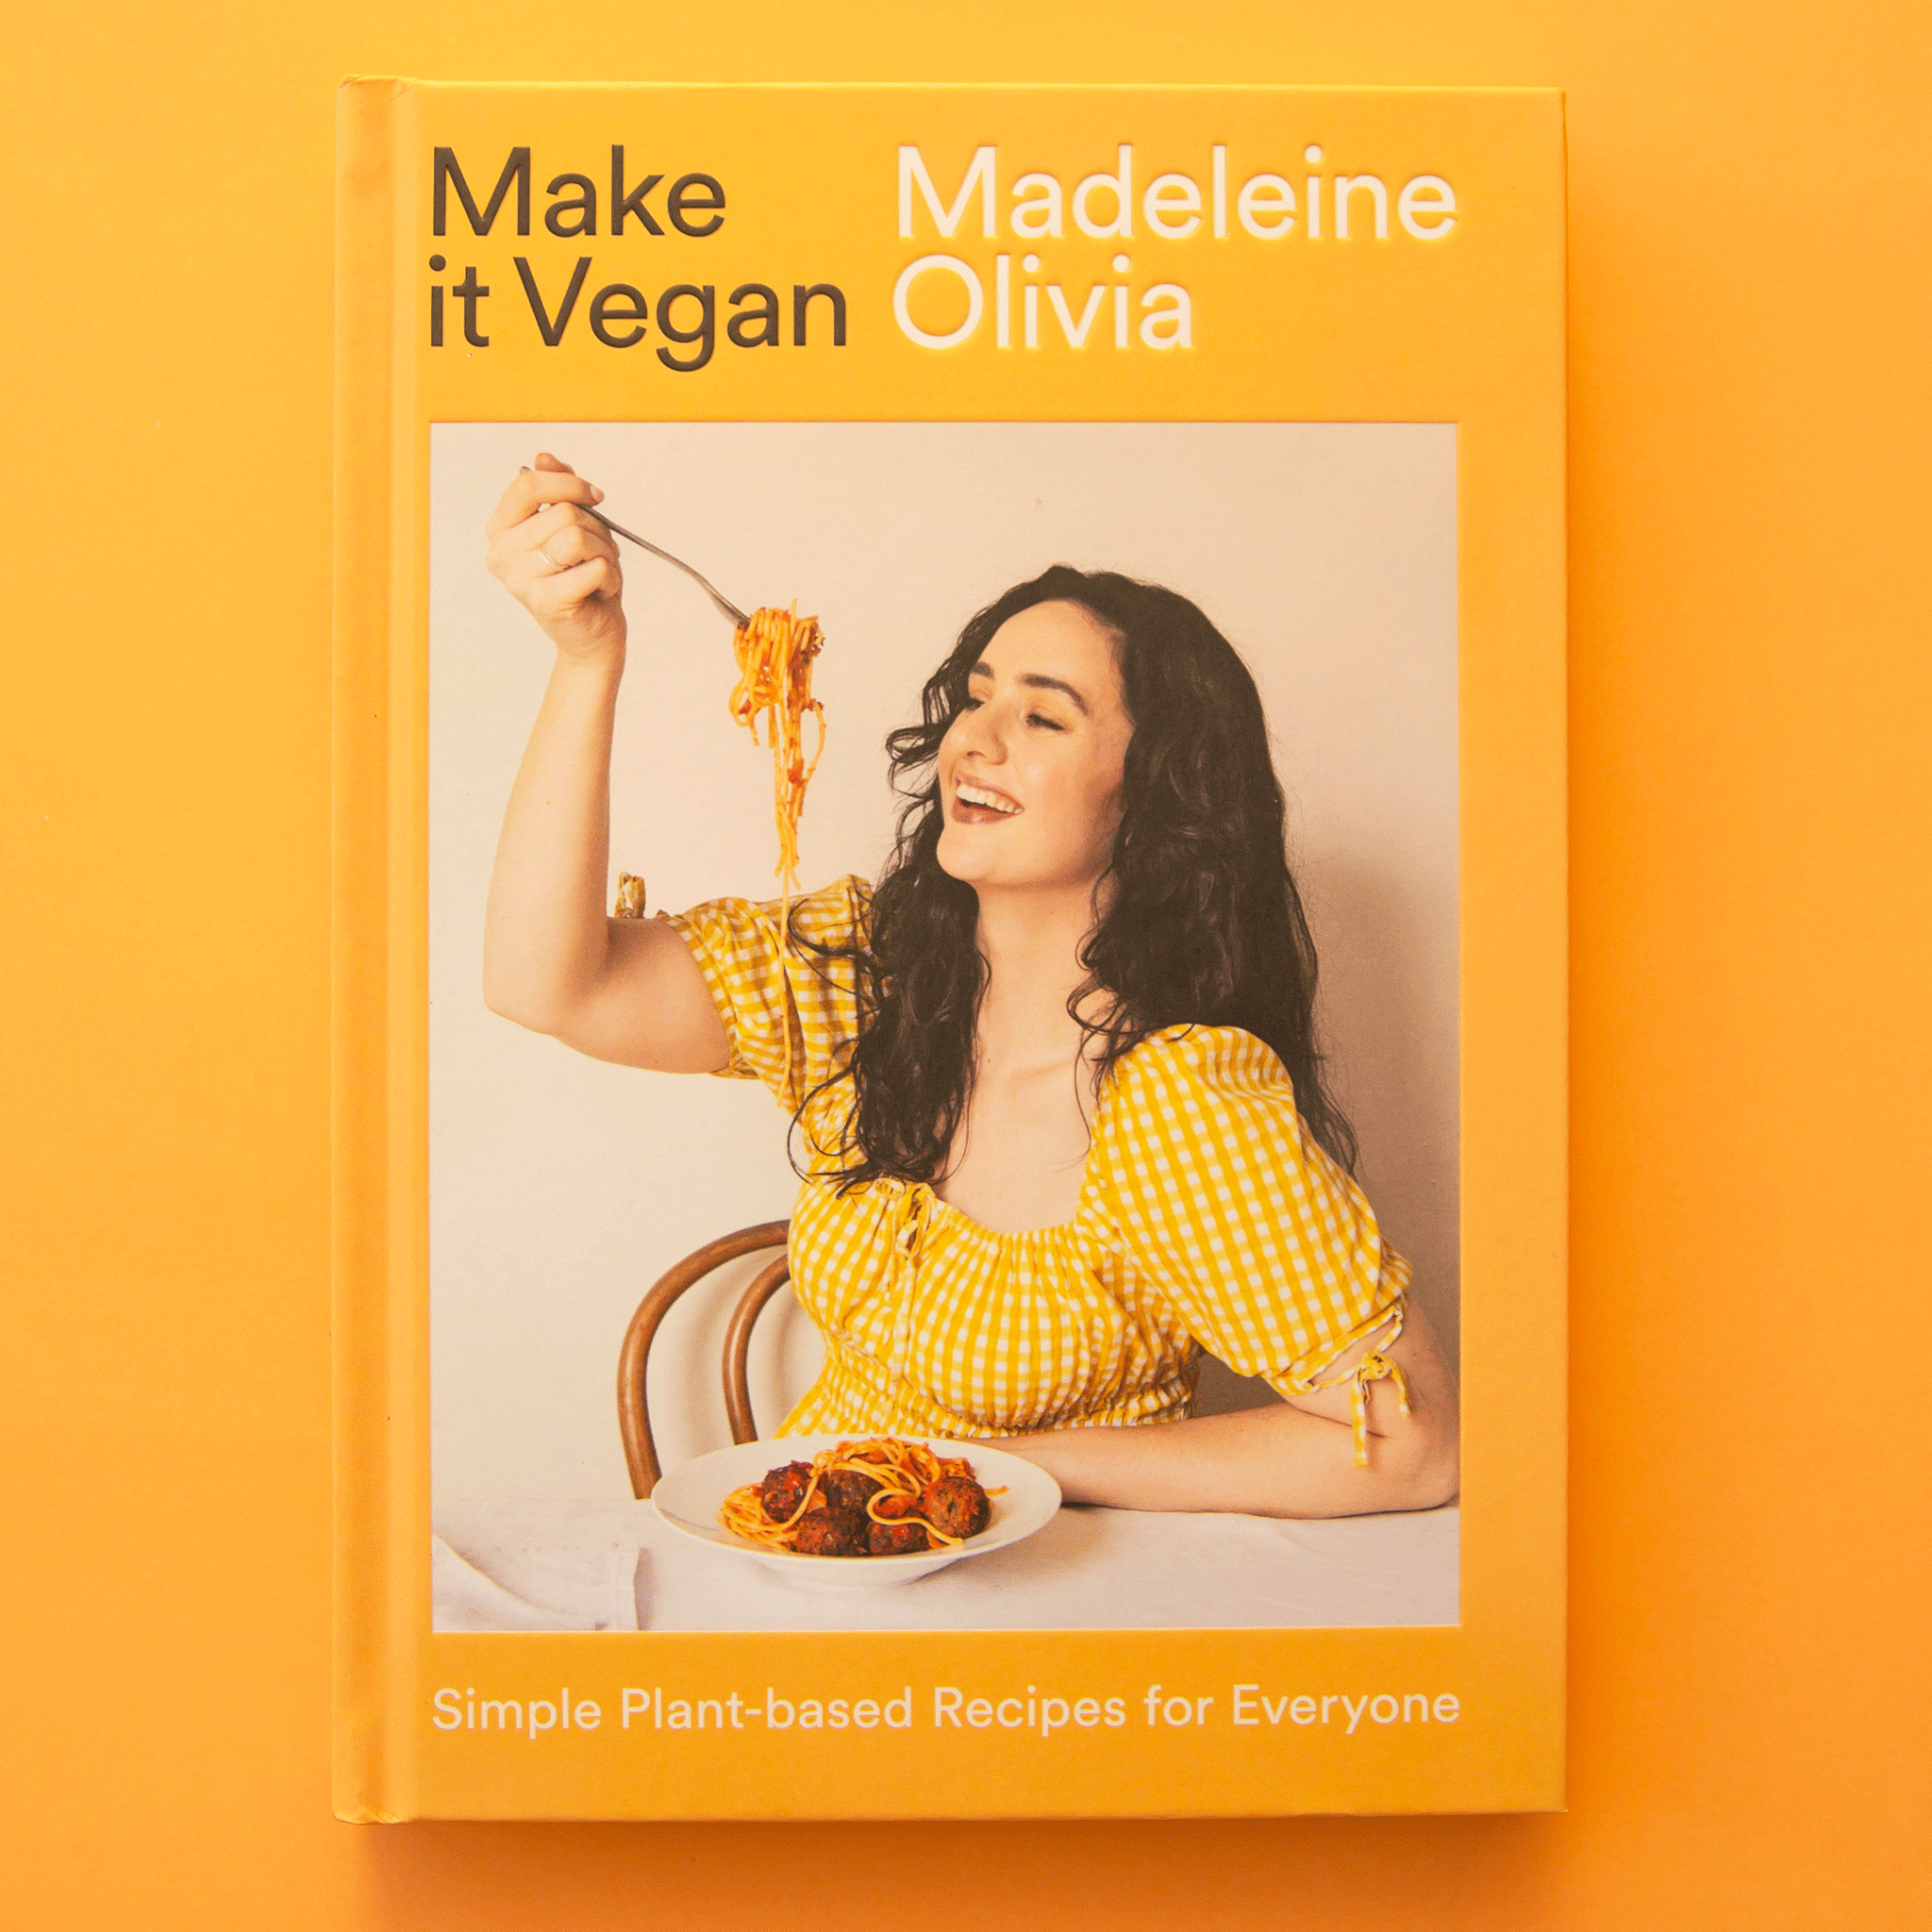 On a yellow background is a yellow cookbook cover with a model holding up a fork full of spaghetti along with black and white text above and below the image that reads, "Make it Vegan Simple Plant-based Recipes for Everyone". 